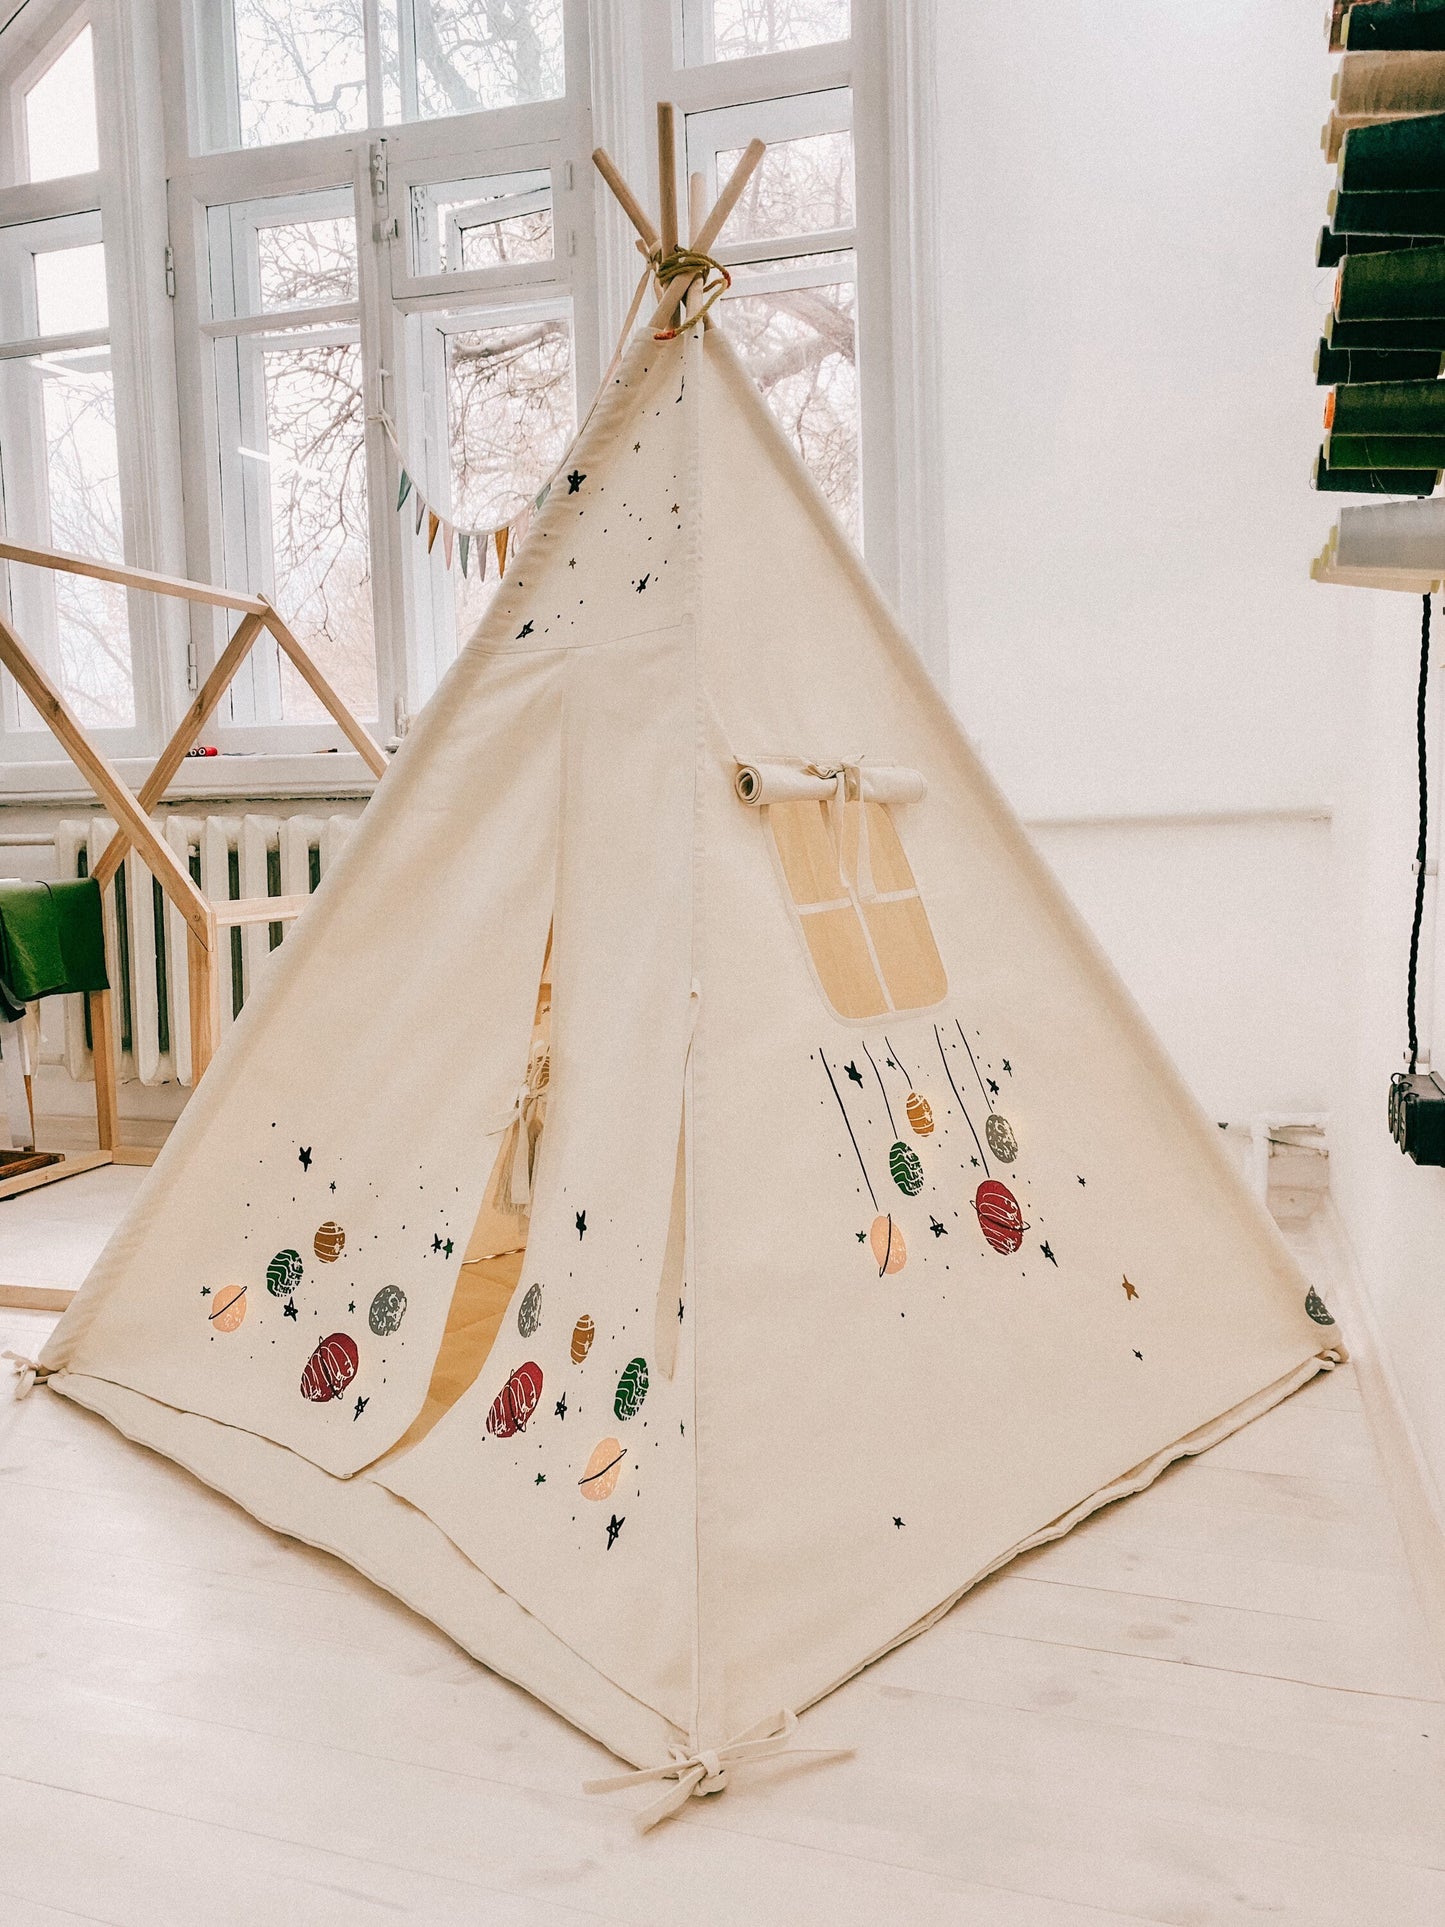 Solar System teepee tent, teepee 4 poles, play tent with two tassels - 1st birthday